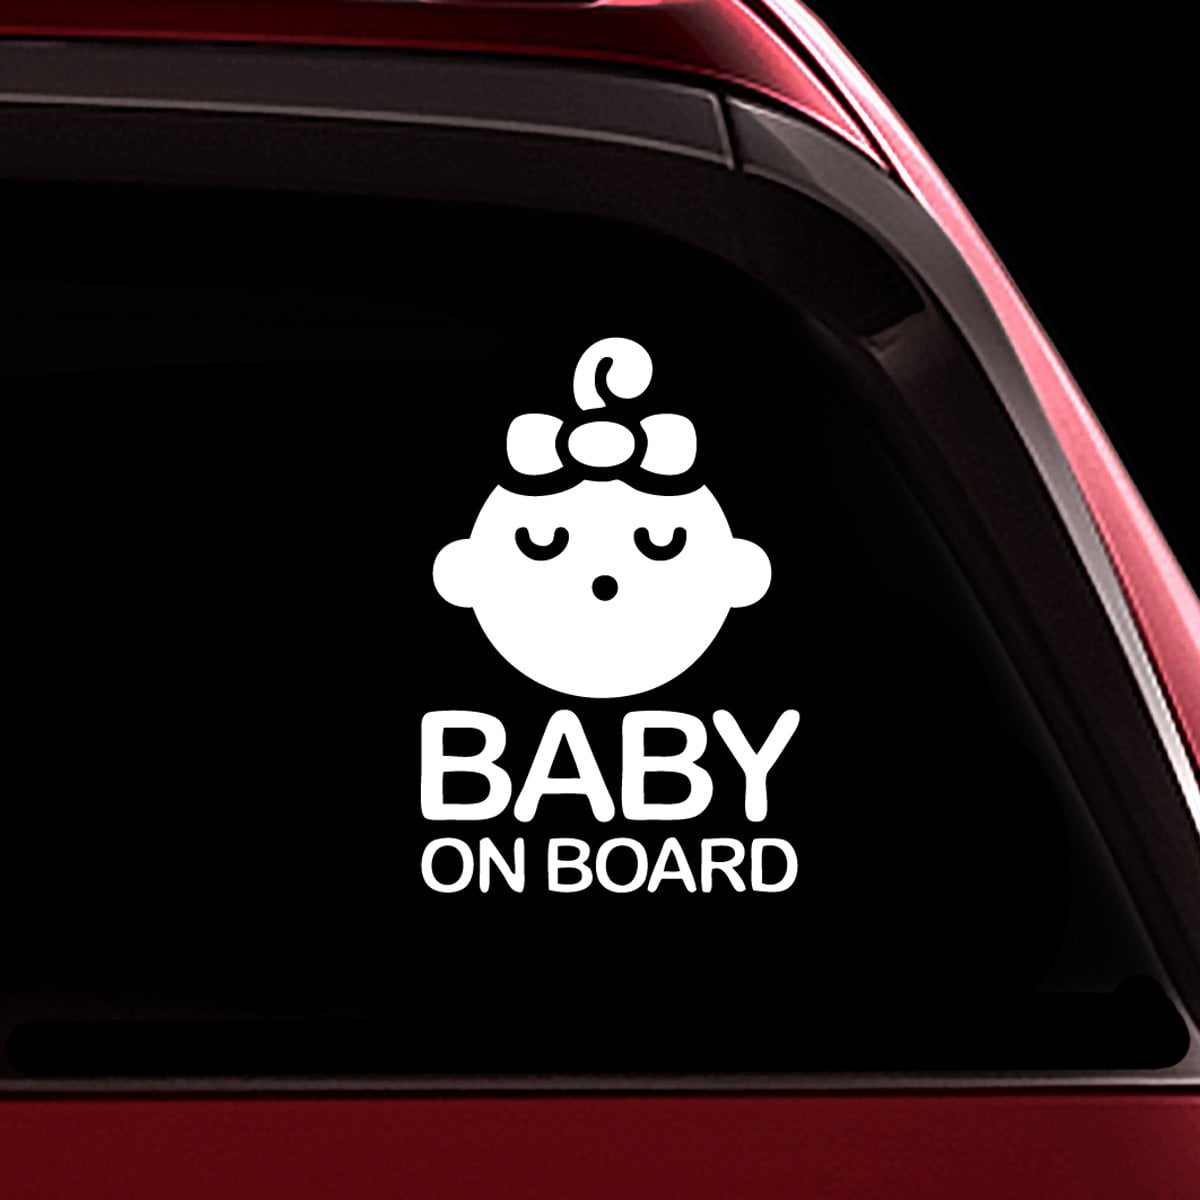 DOG UP IN THIS BITCH Vinyl Decal Sticker Car Window Bumper Funny Baby On Board 